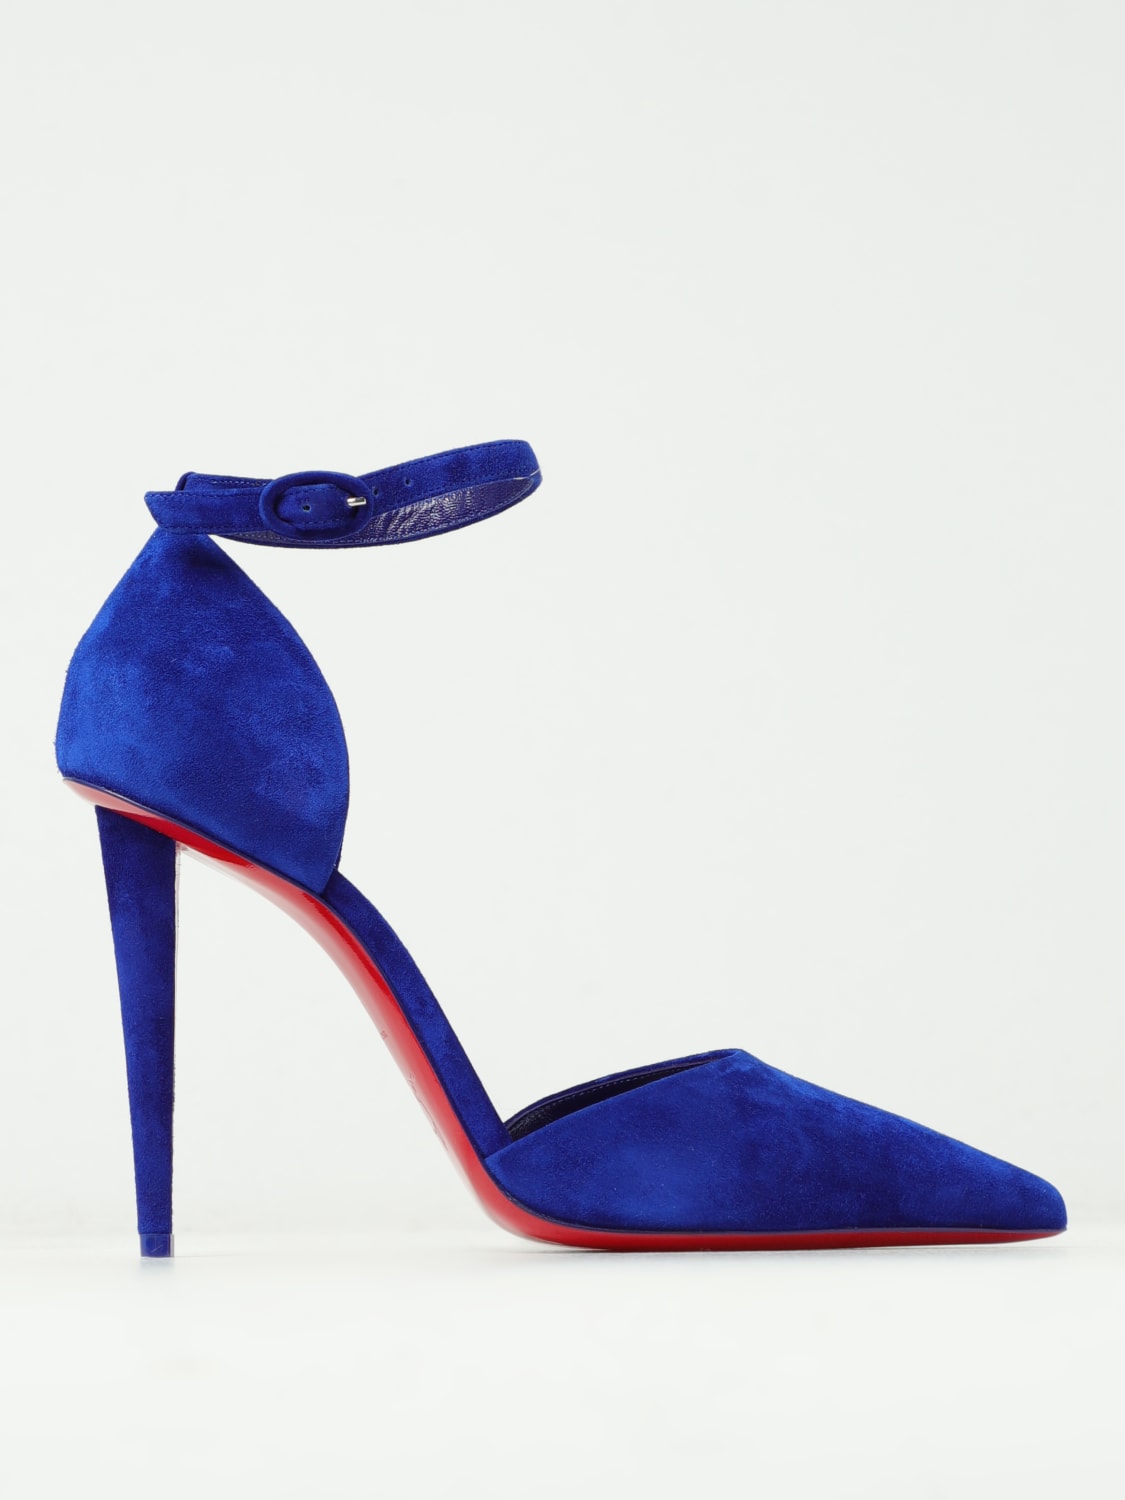 CHRISTIAN LOUBOUTIN: Astrida pumps in suede - Blue Christian Louboutin high heel shoes 3230712 online at GIGLIO.COM